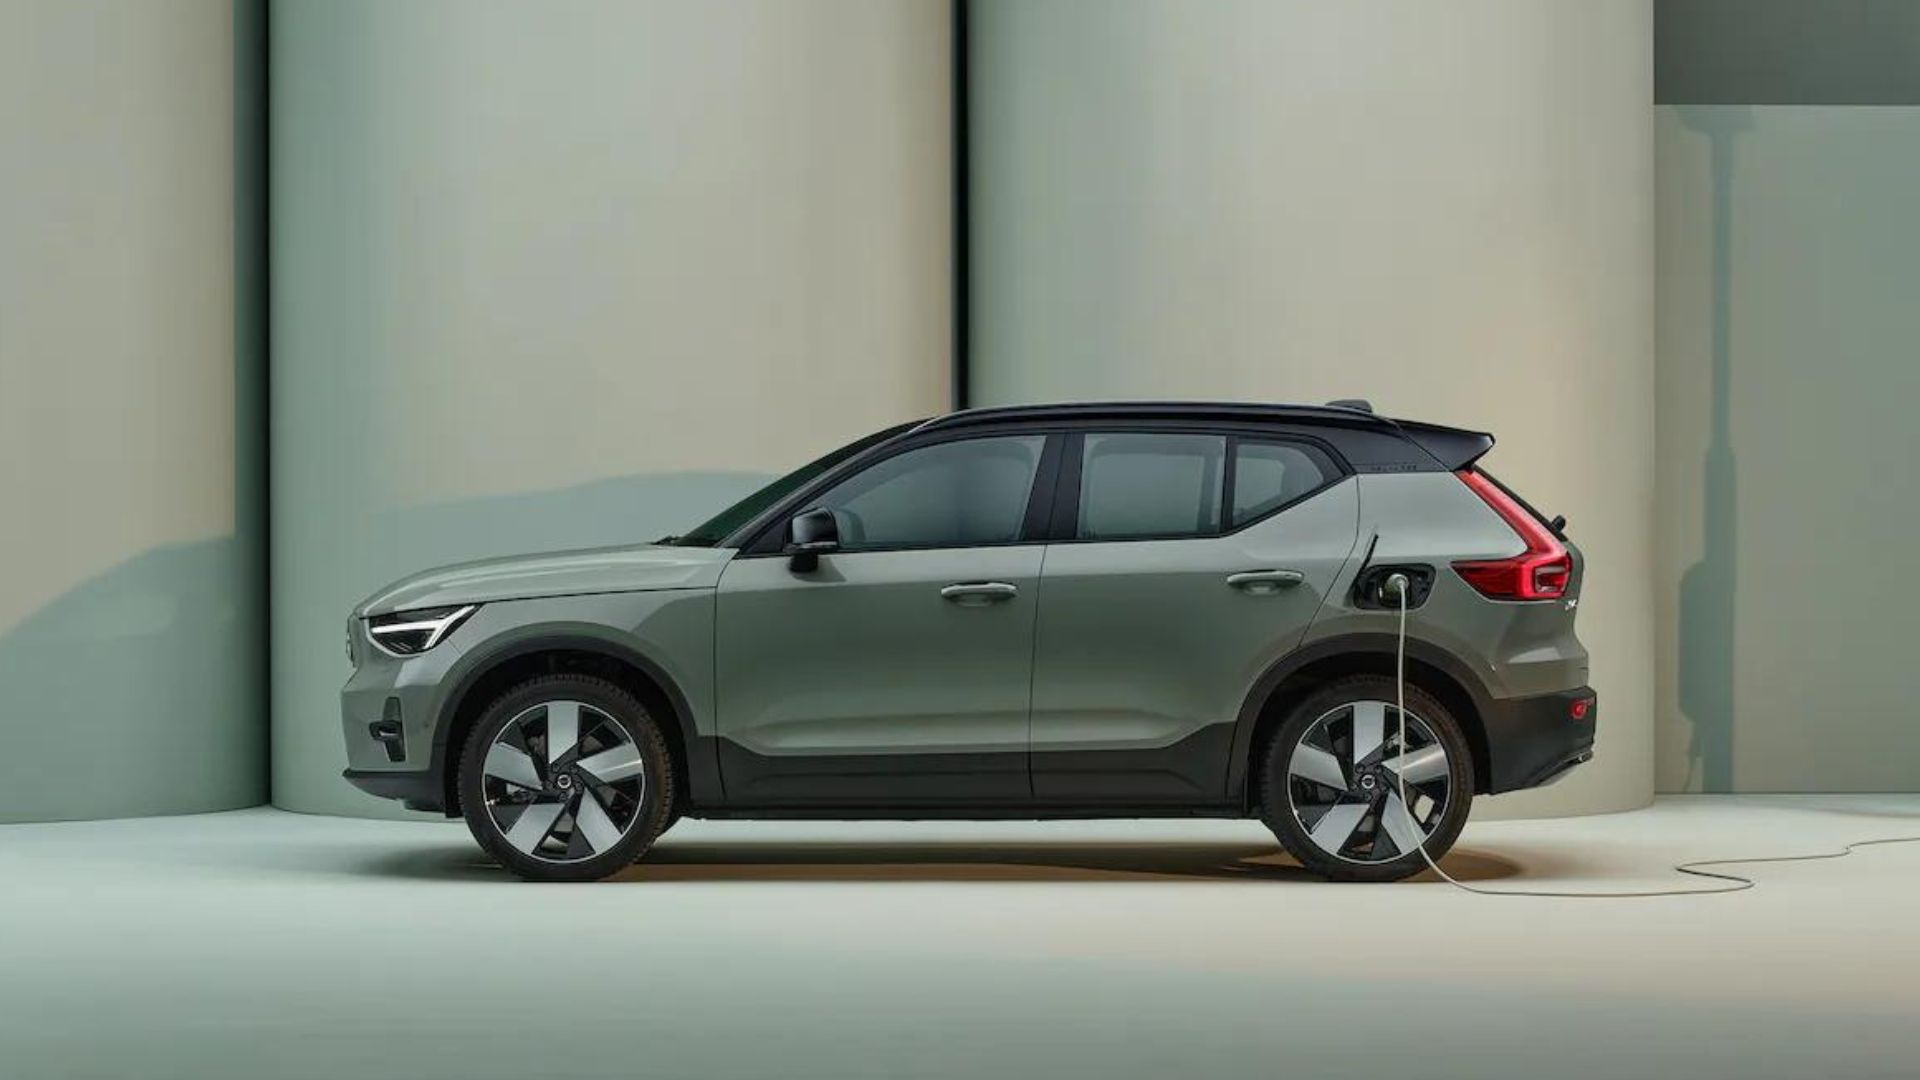 https://e-vehicleinfo.com/volvo-xc40-recharge-electric-car-launched-in-india-price-and-range/